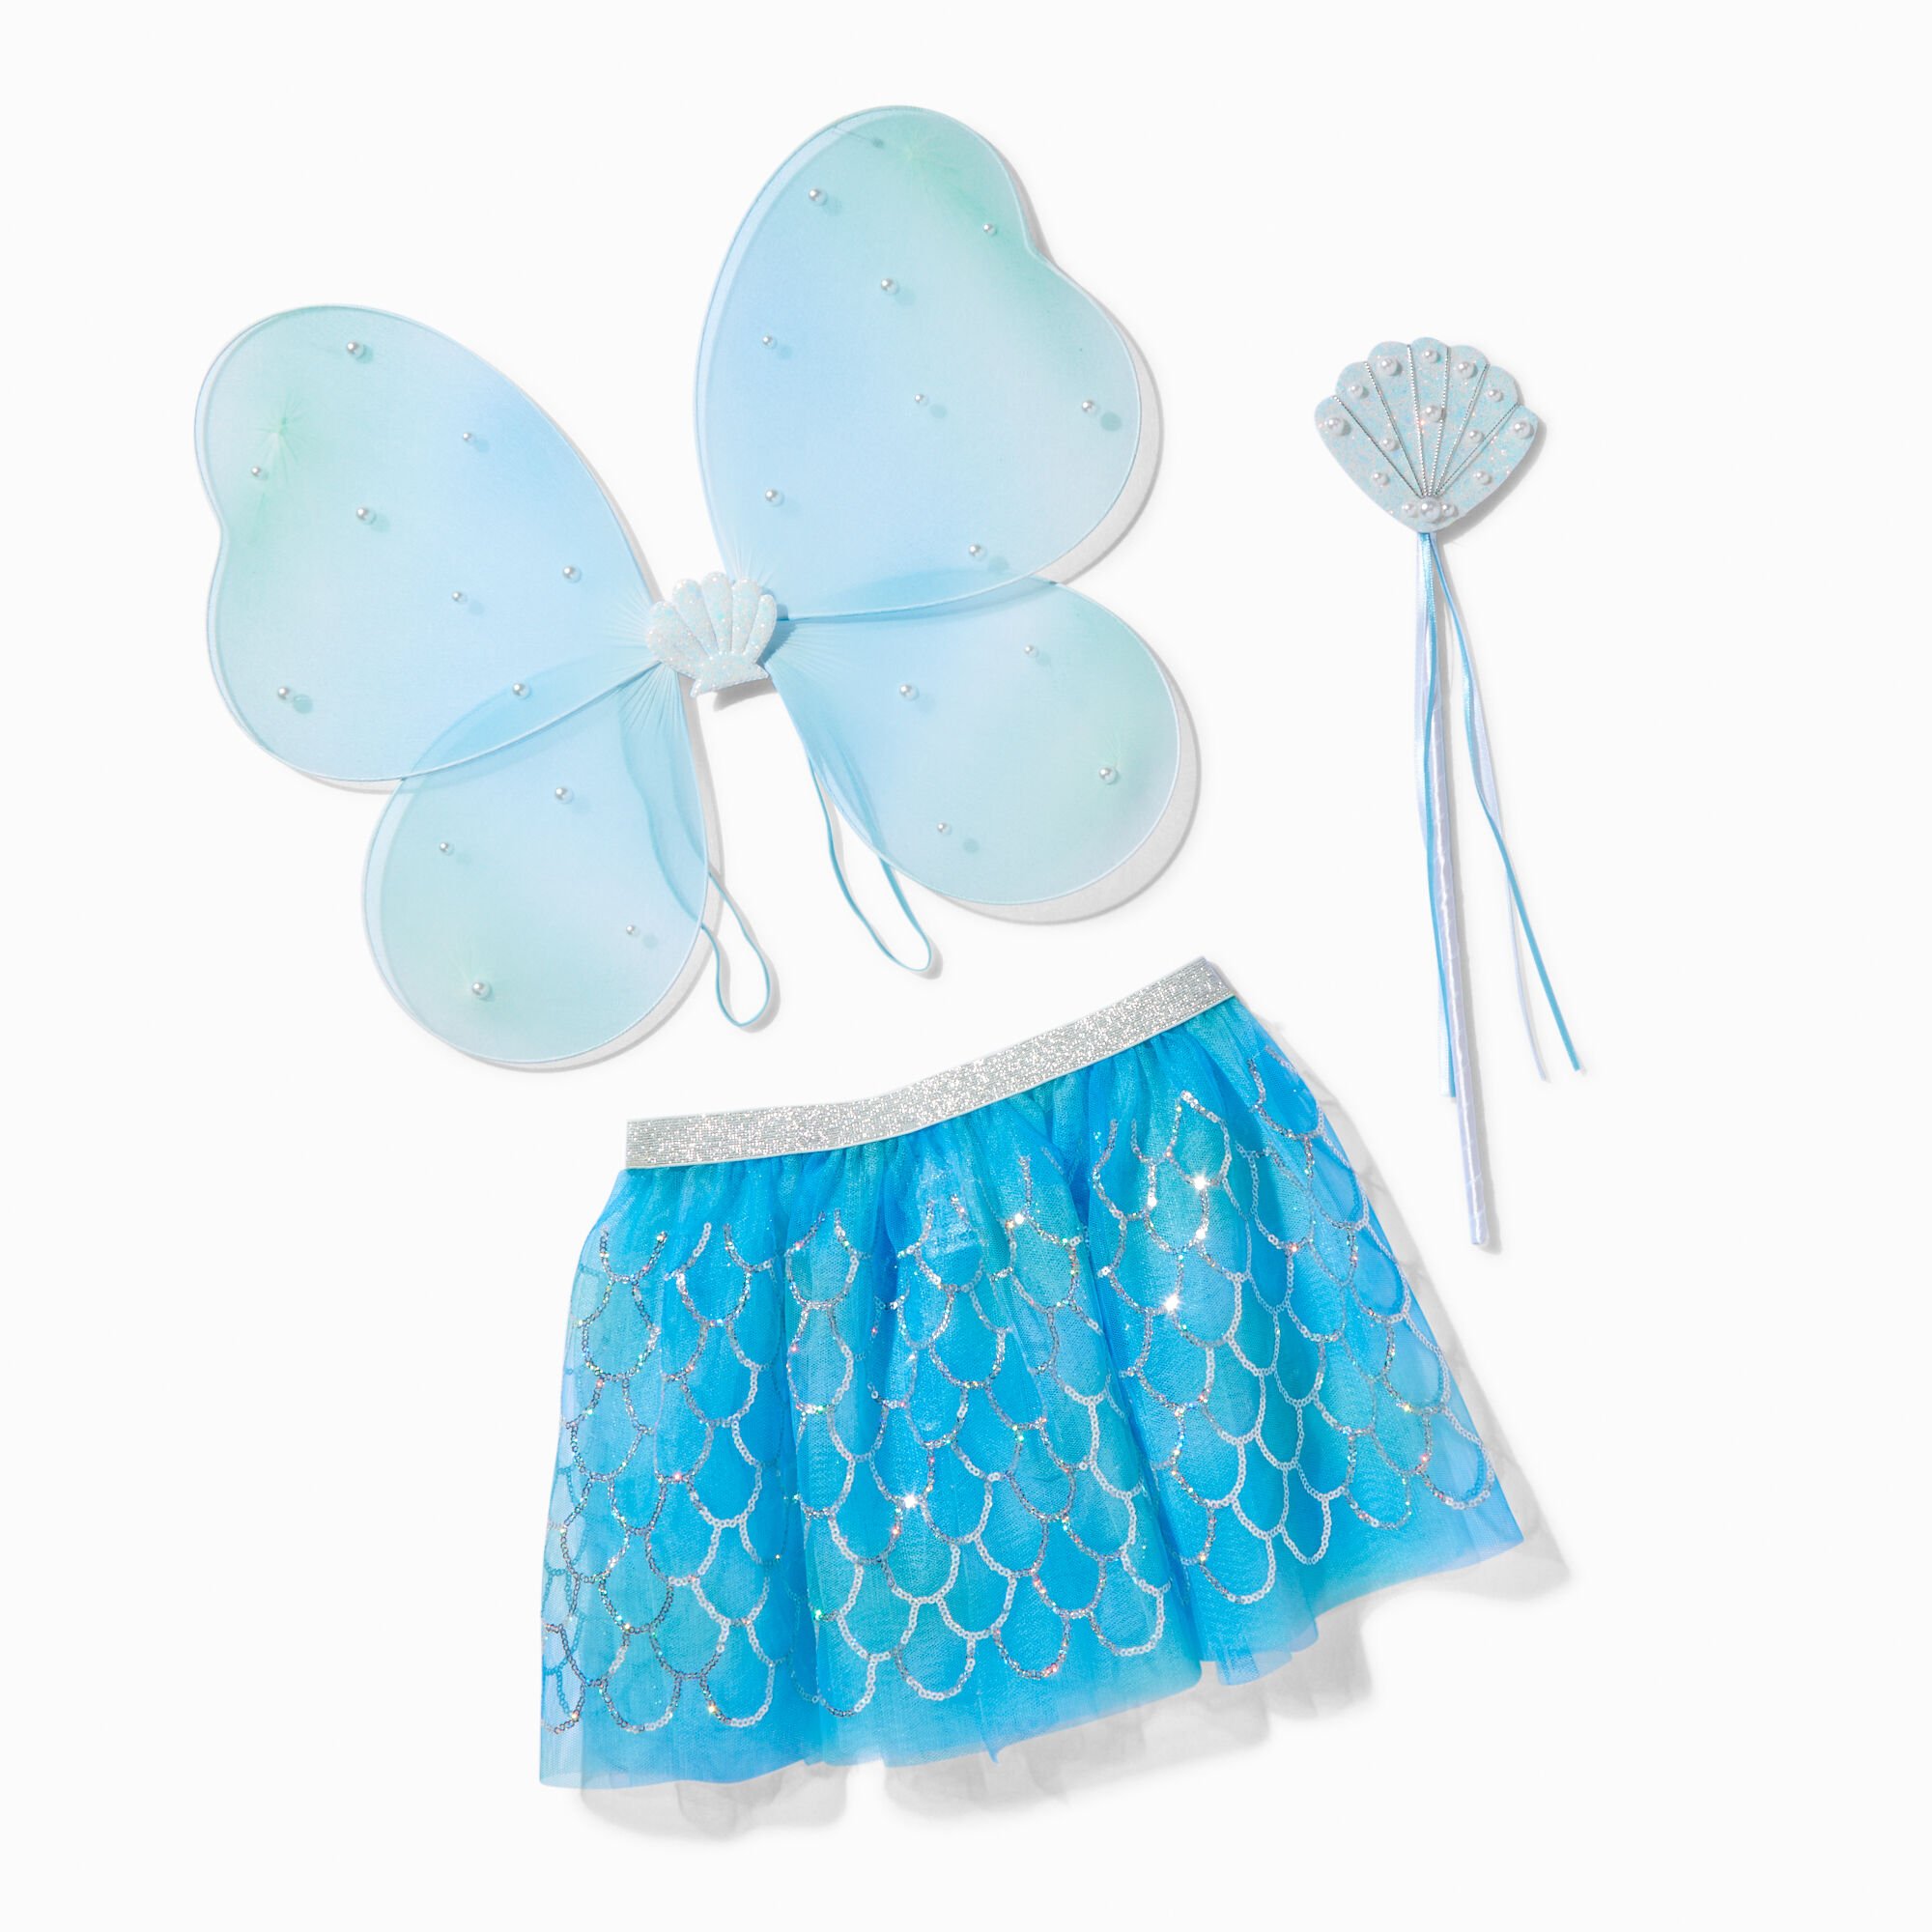 View Claires Club Mermaid Dress Up Set 3 Pack Blue information